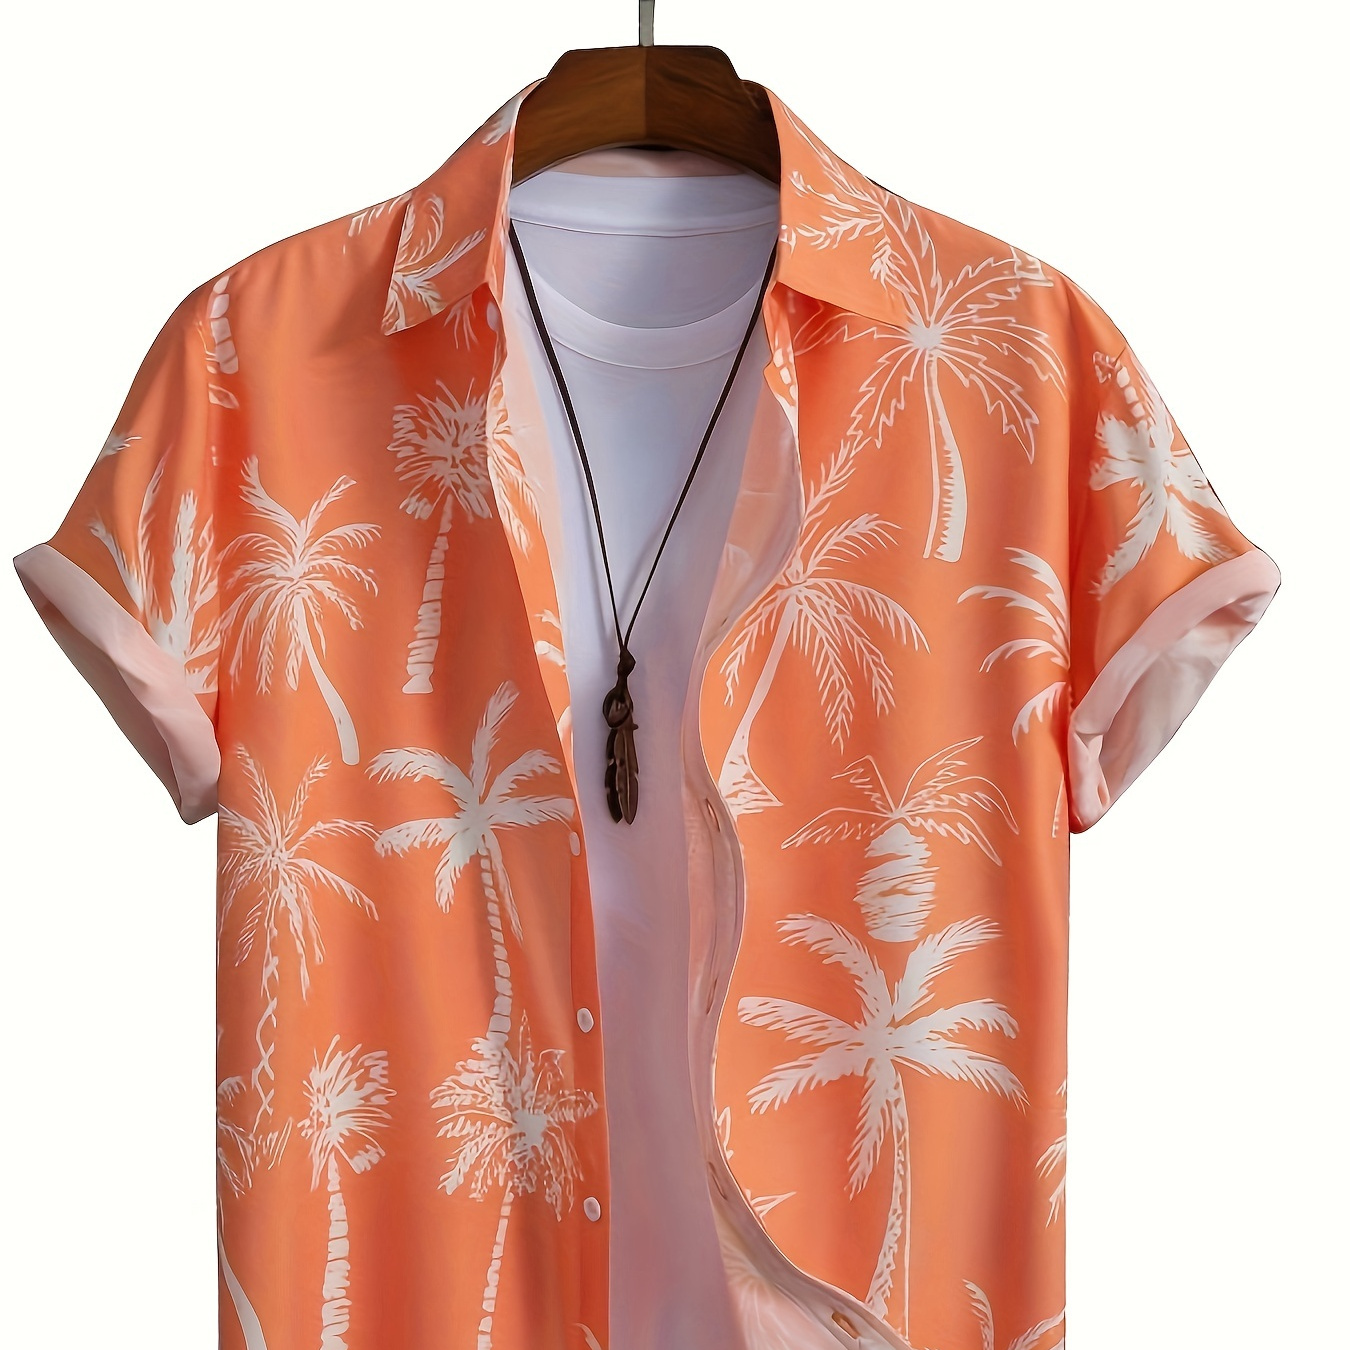 

Hawaiian Coconut Pattern Men's Short Sleeve Lapel Shirt, Comfy Casual Male Tops For Summer Vacation, Gift For Men